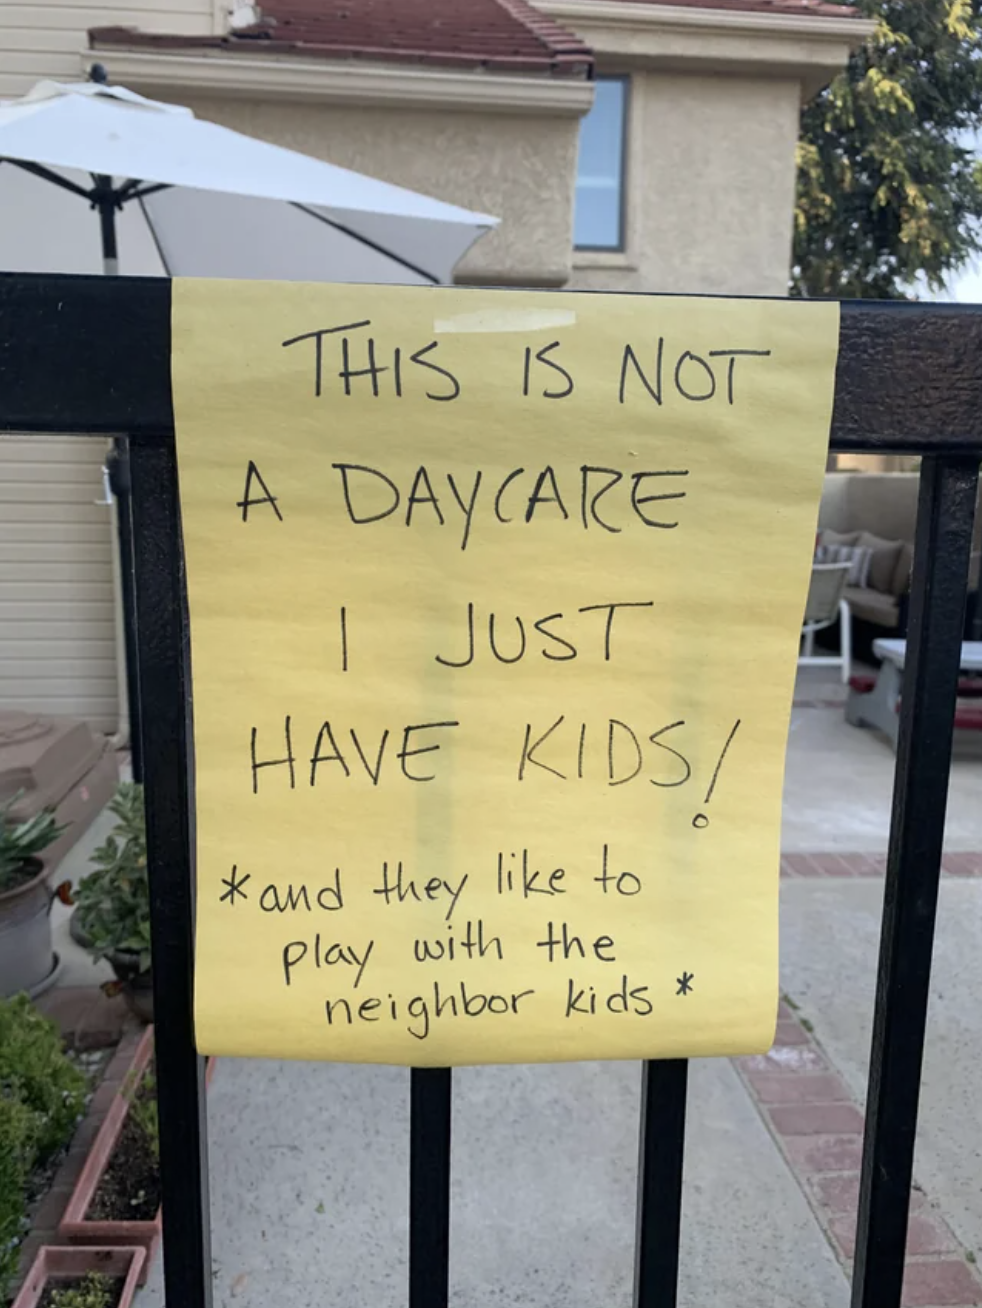 &quot;This is not a daycare, I just have kids&quot;